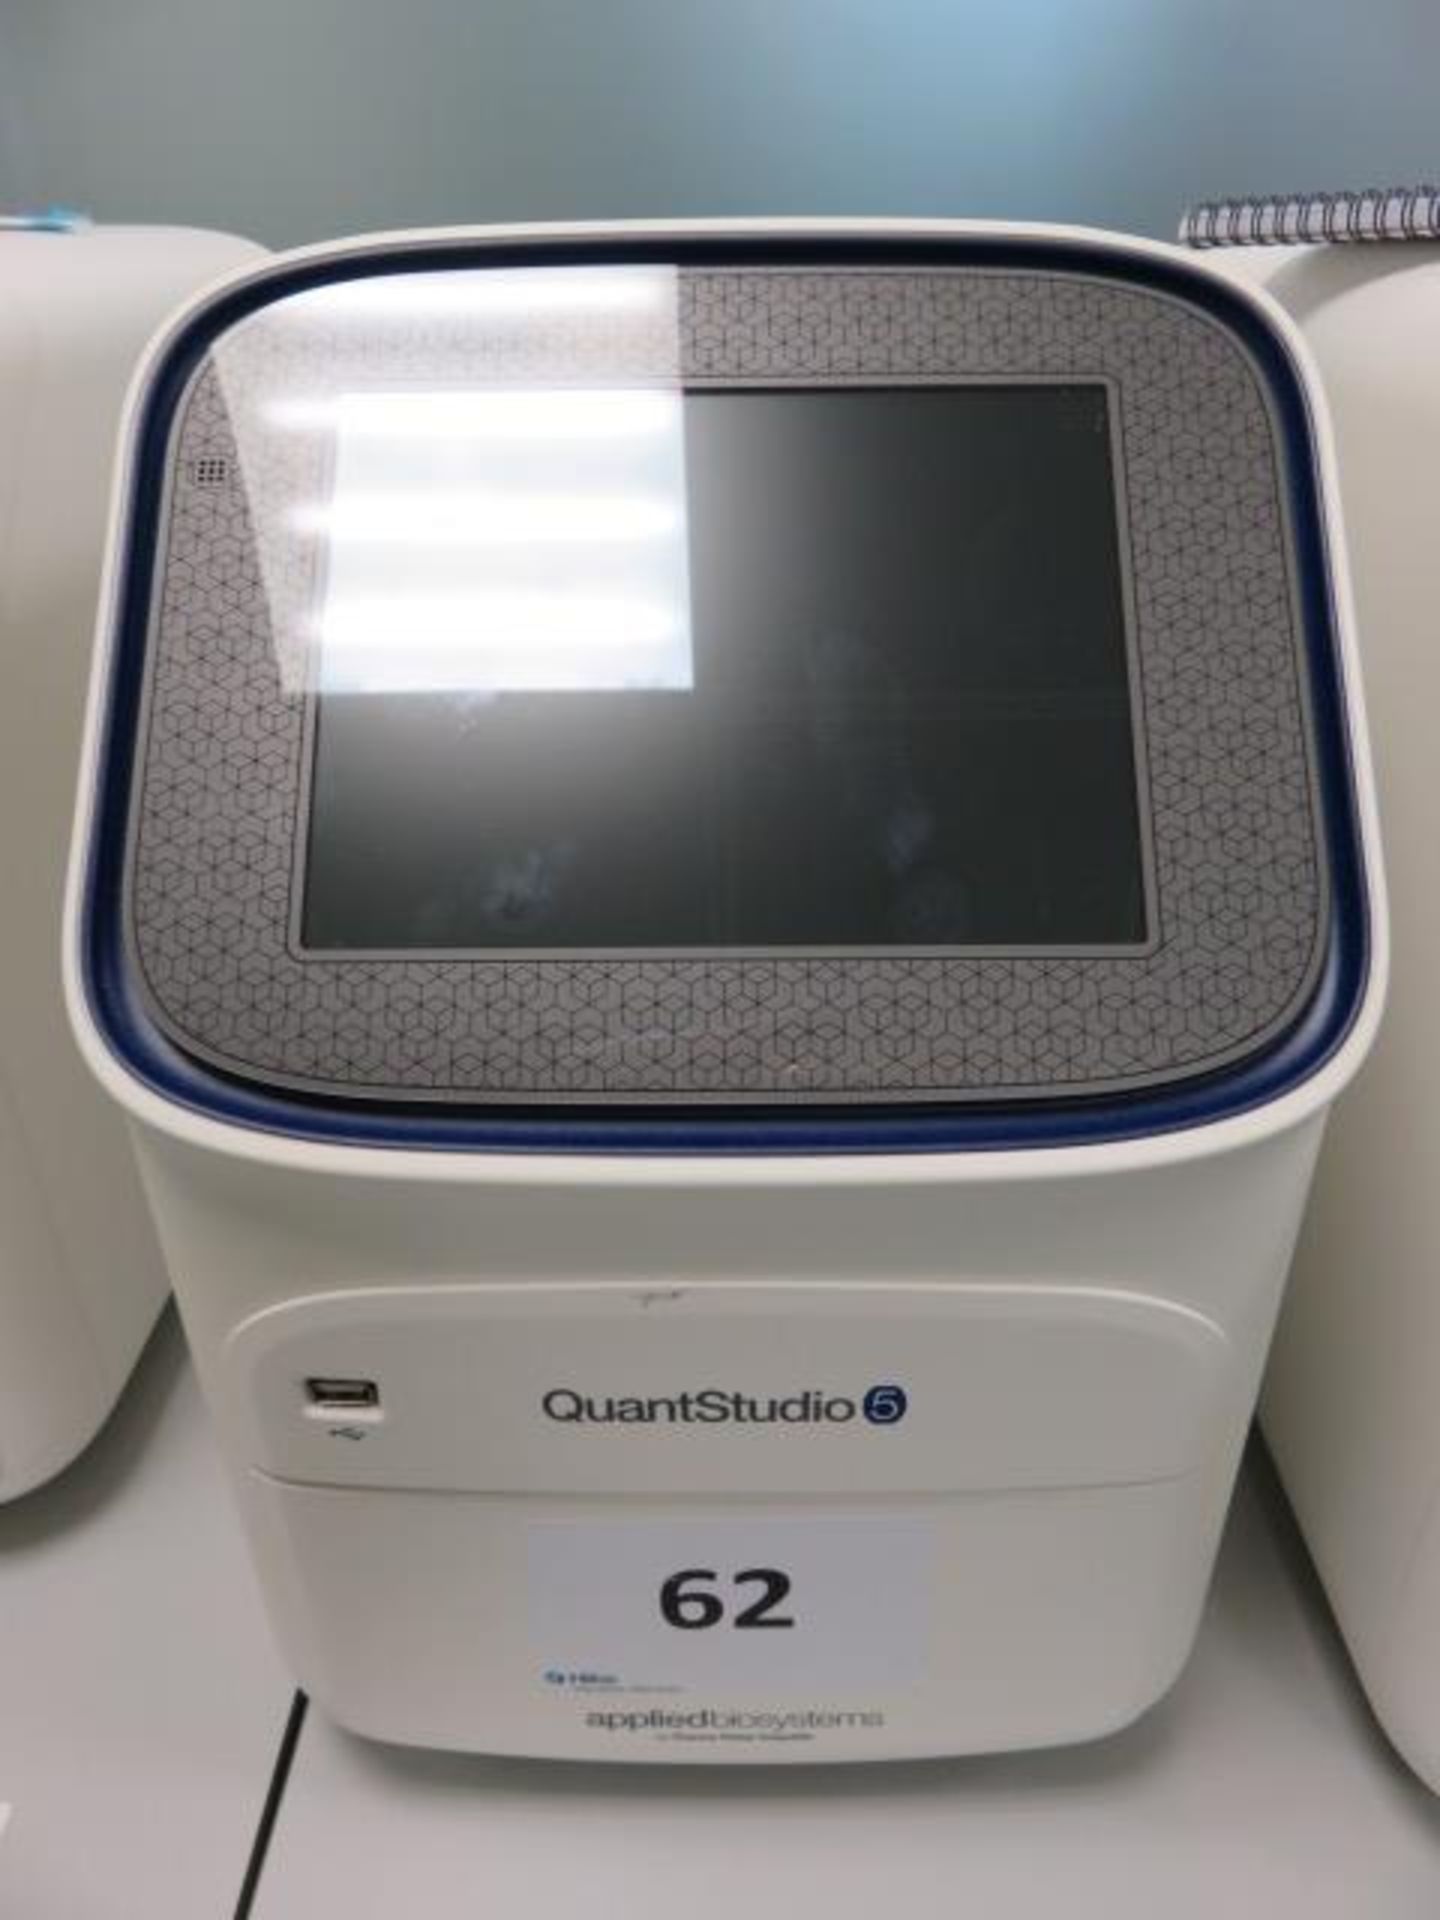 Applied Biosystems Quandt Studio 5 Realtime PCR Tester (384 - Well Block). Serial No. 272531605 (2